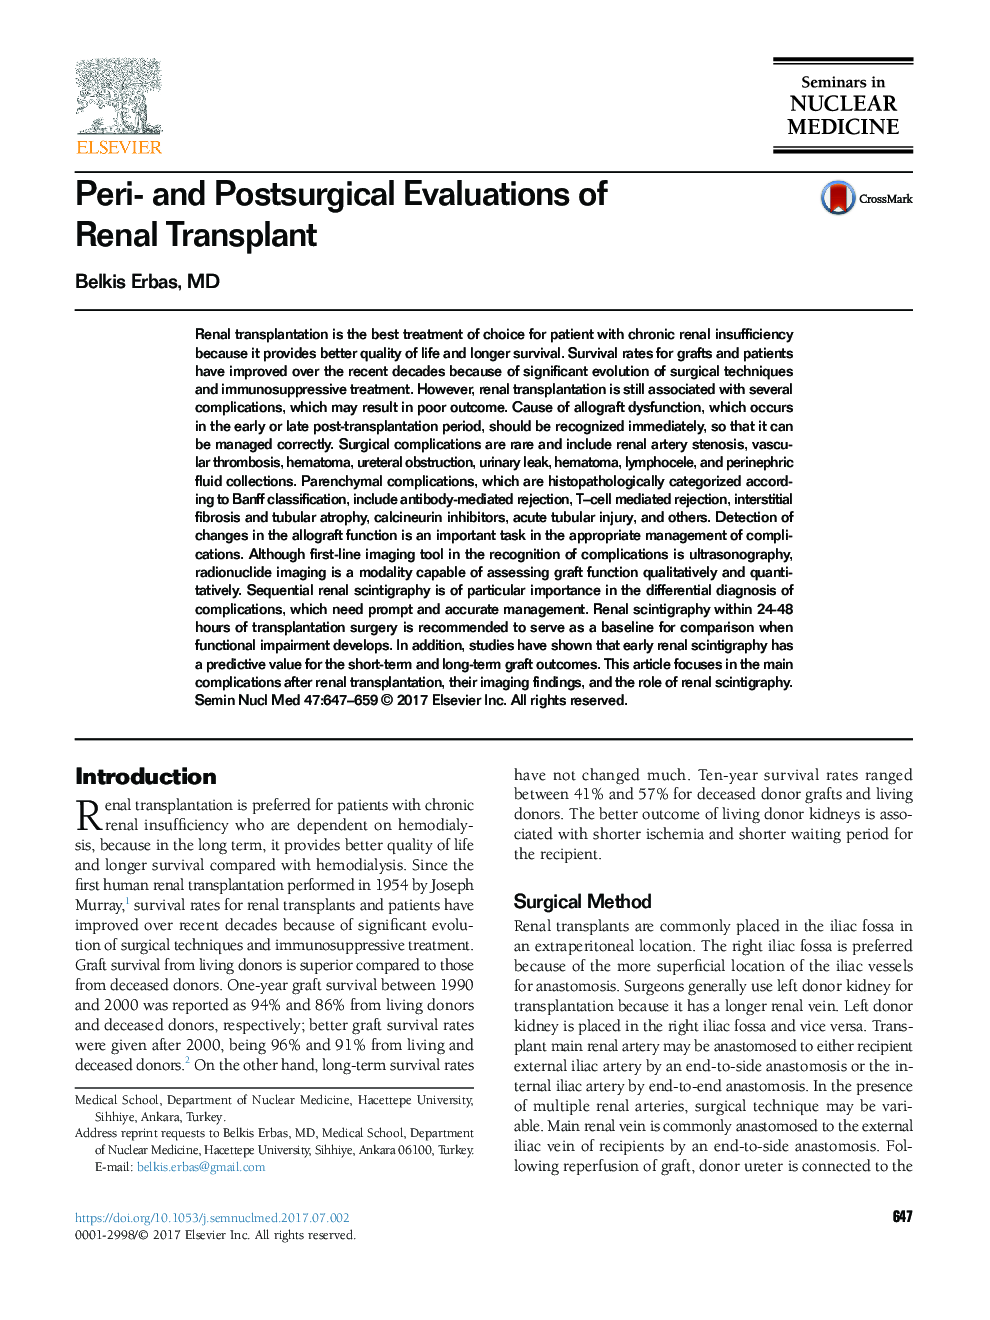 Peri- and Postsurgical Evaluations of Renal Transplant